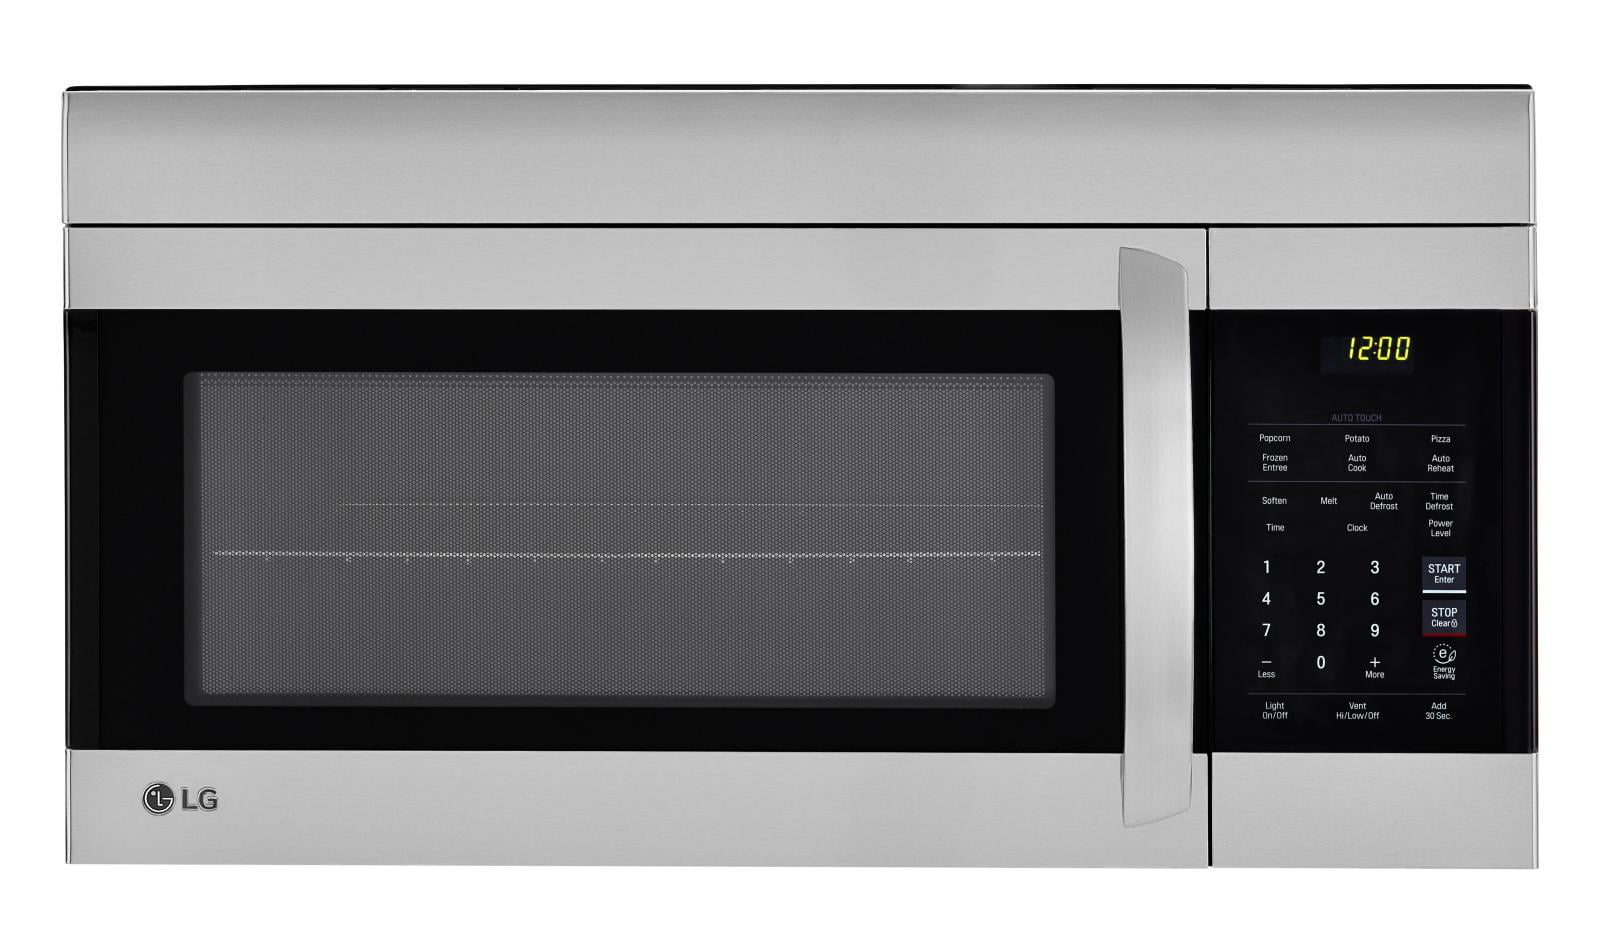 LG LMV1762ST - 1.7 Cu Ft Over the Range Microwave Oven : Stainless